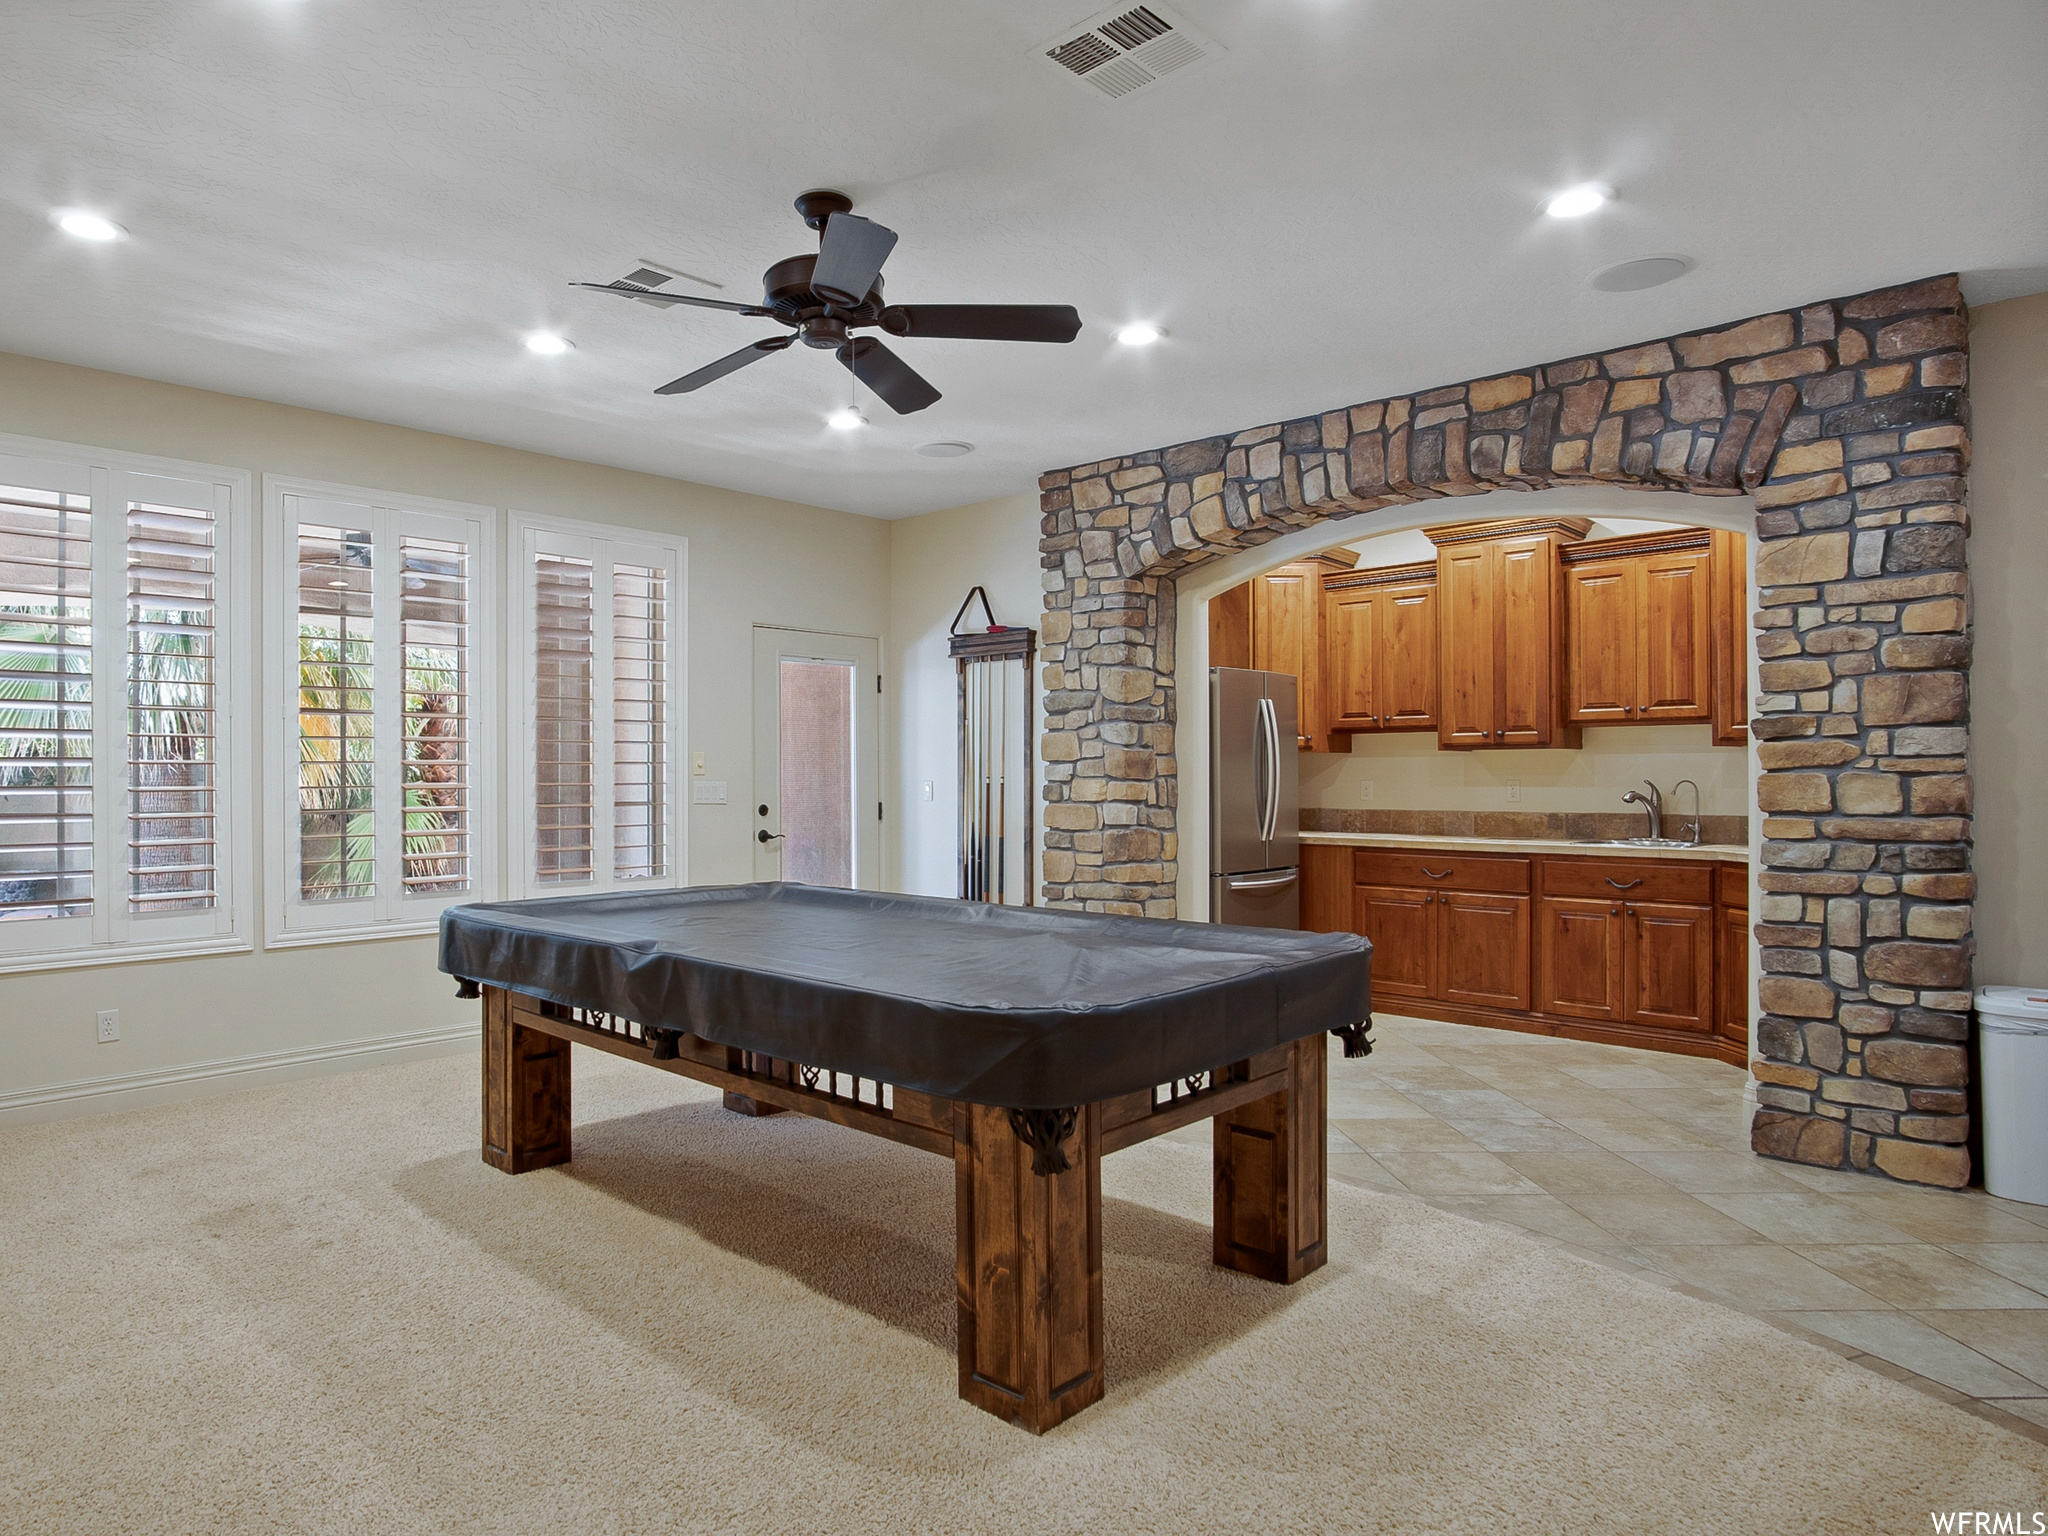 Playroom with a ceiling fan, tile floors, and natural light